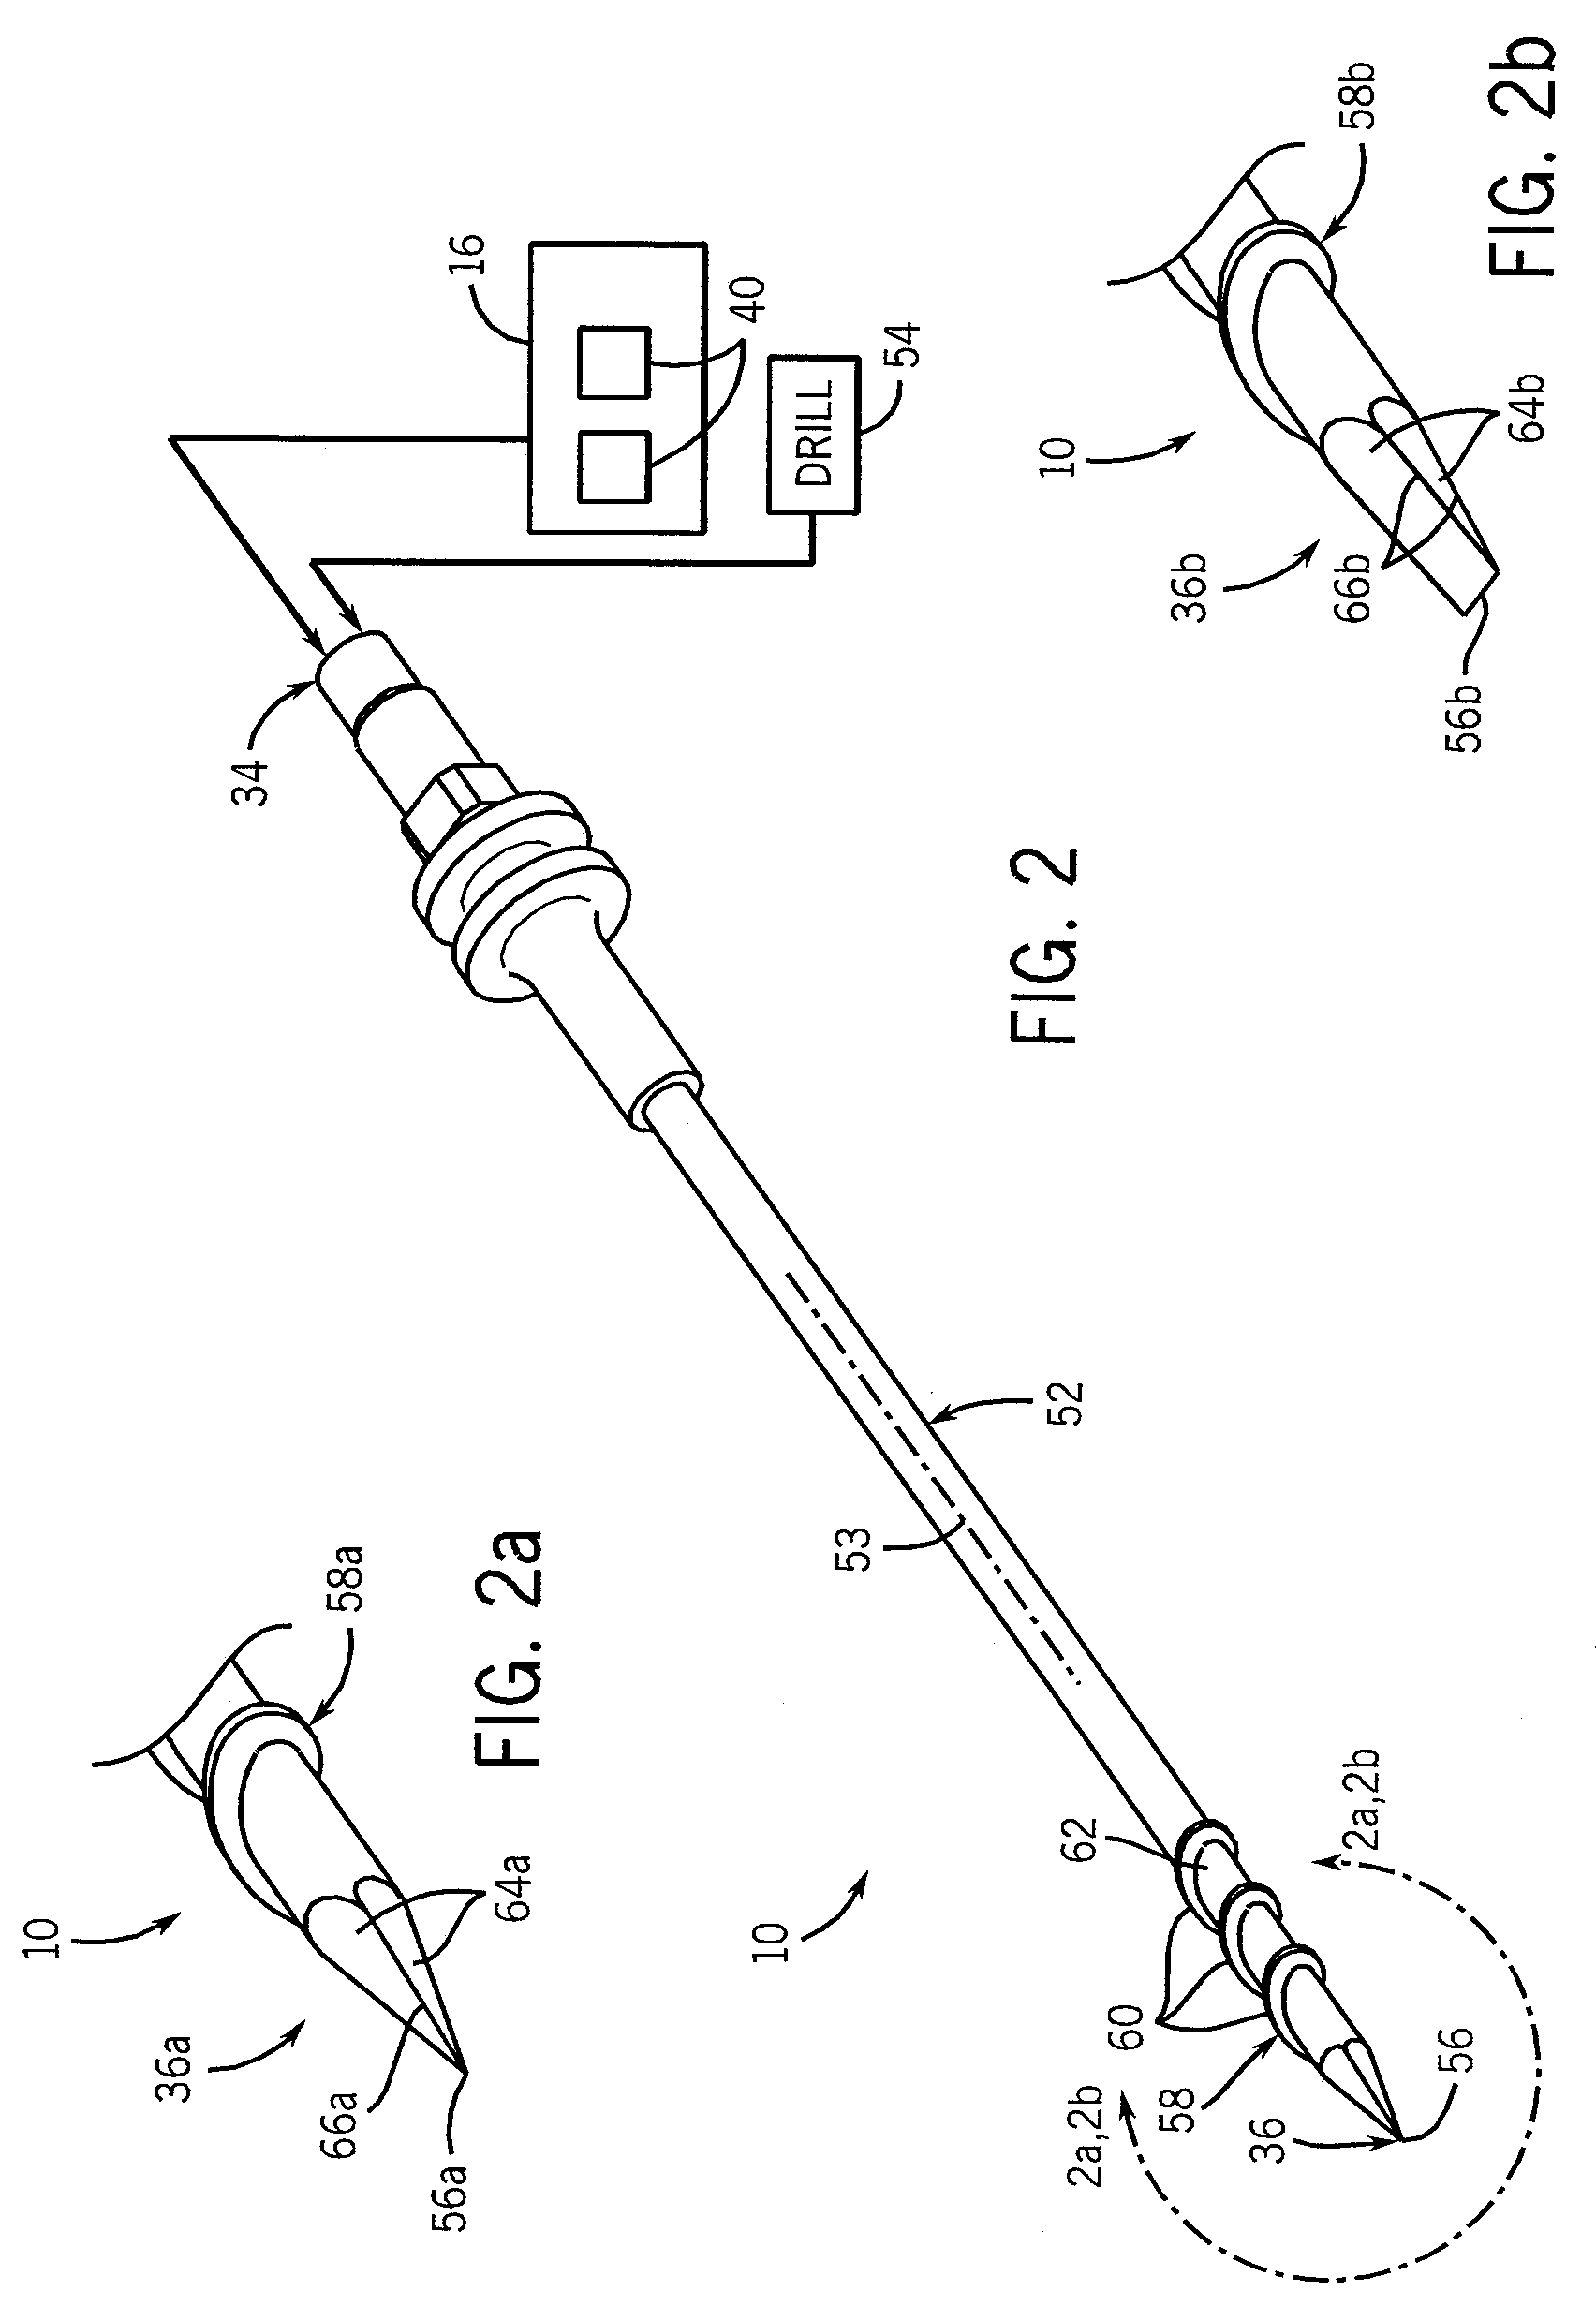 Method and apparatus for performing pedicle screw fusion surgery